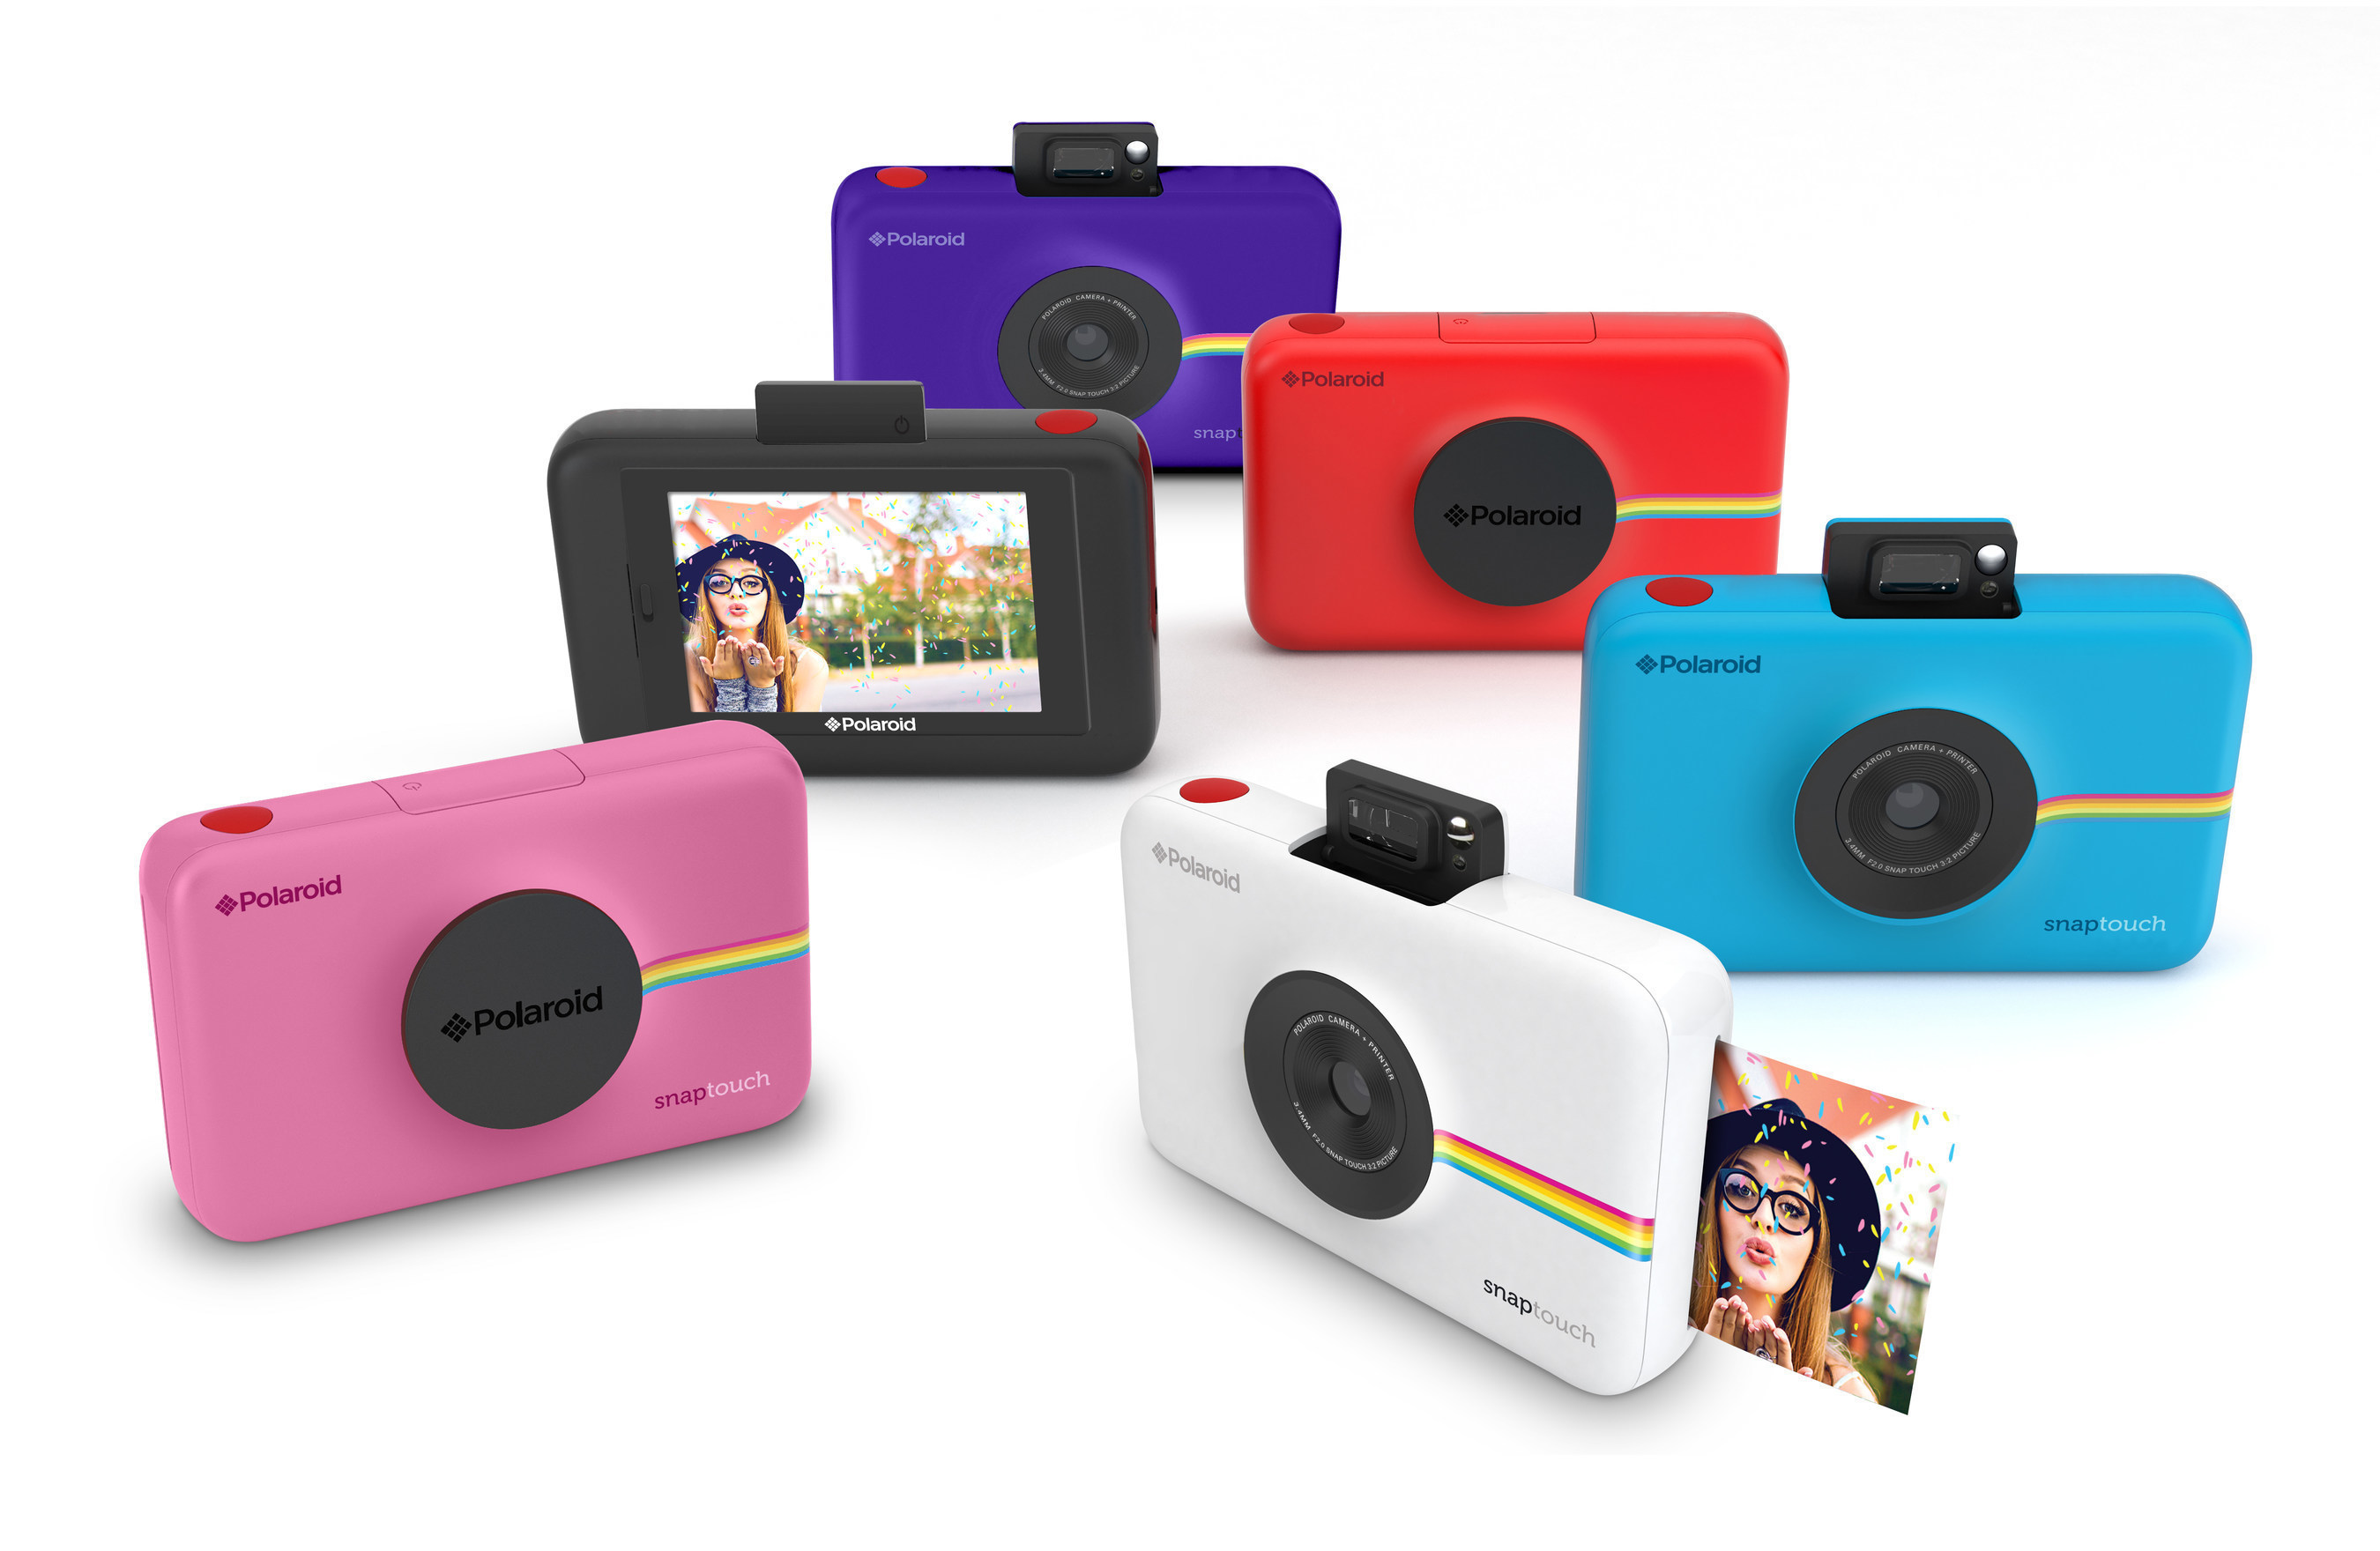 The Polaroid Snap Touch instant digital camera is now available for pre-order.